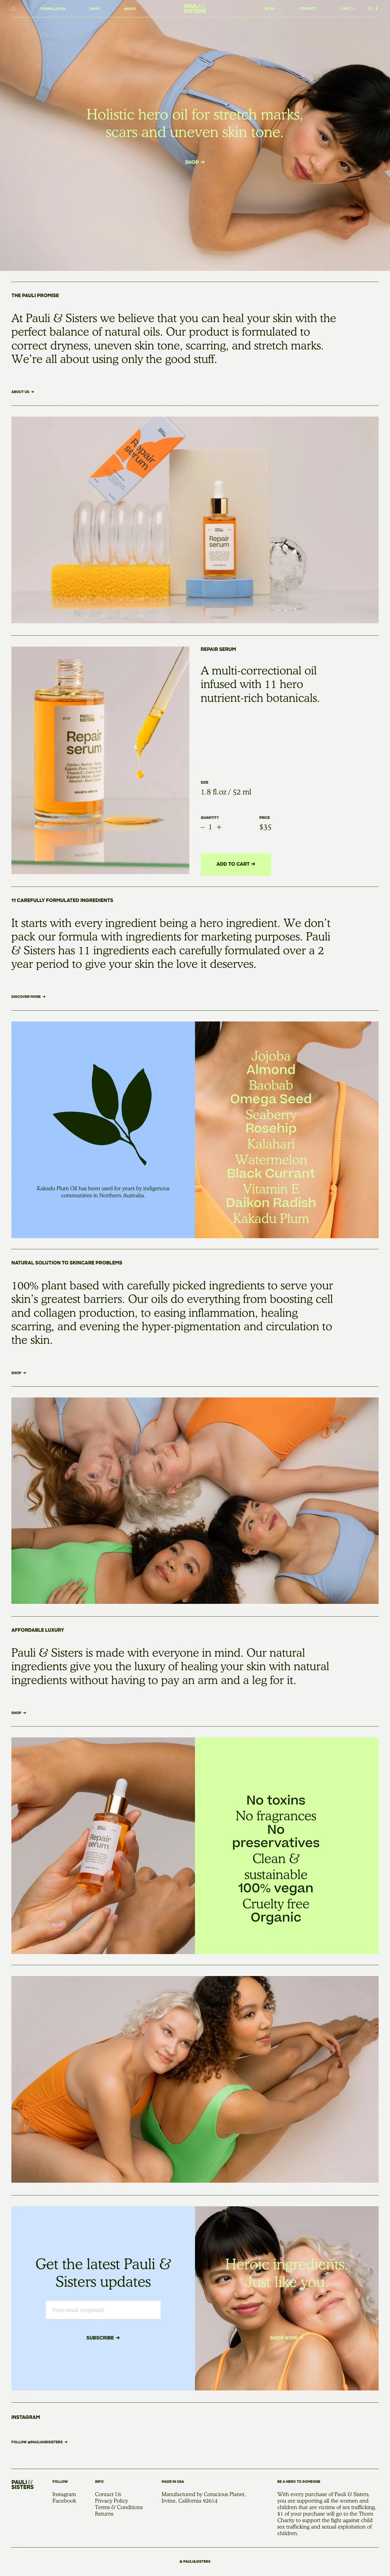 Pauli & Sisters Landing Page Example: At Pauli & Sisters we believe that you can heal your skin with the perfect balance of natural oils. Our product is formulated to correct dryness, uneven skin tone, scarring, and stretch marks. We’re all about using only the good stuff.